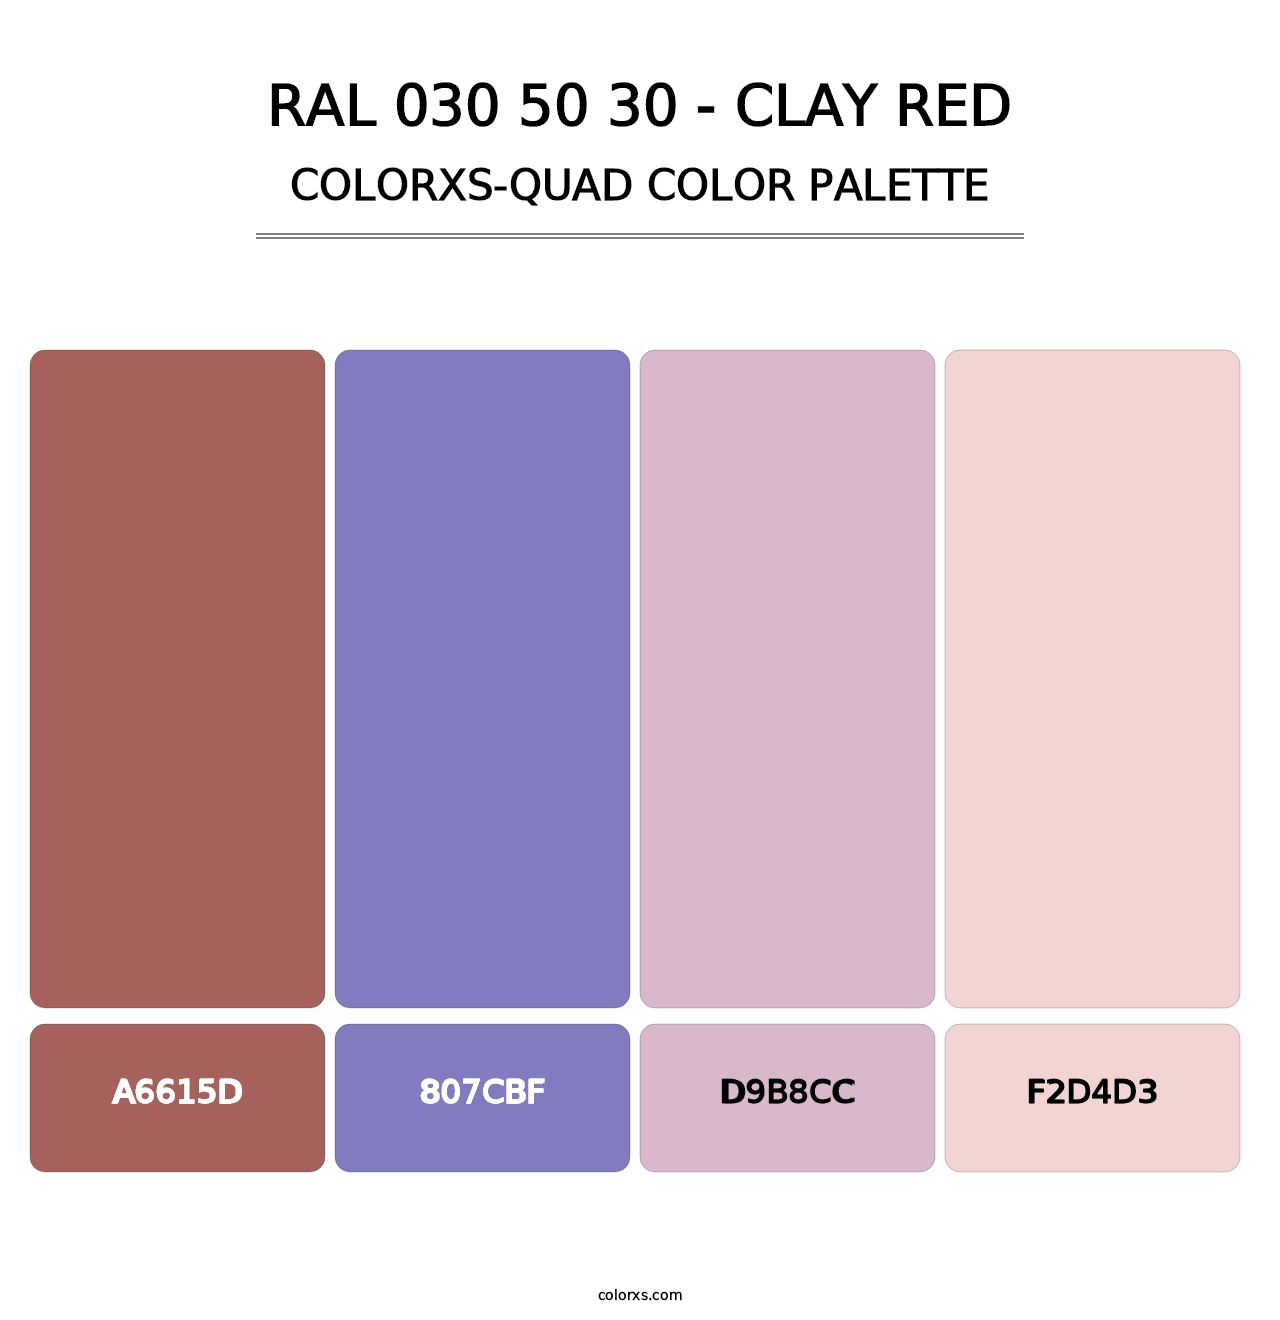 RAL 030 50 30 - Clay Red - Colorxs Quad Palette